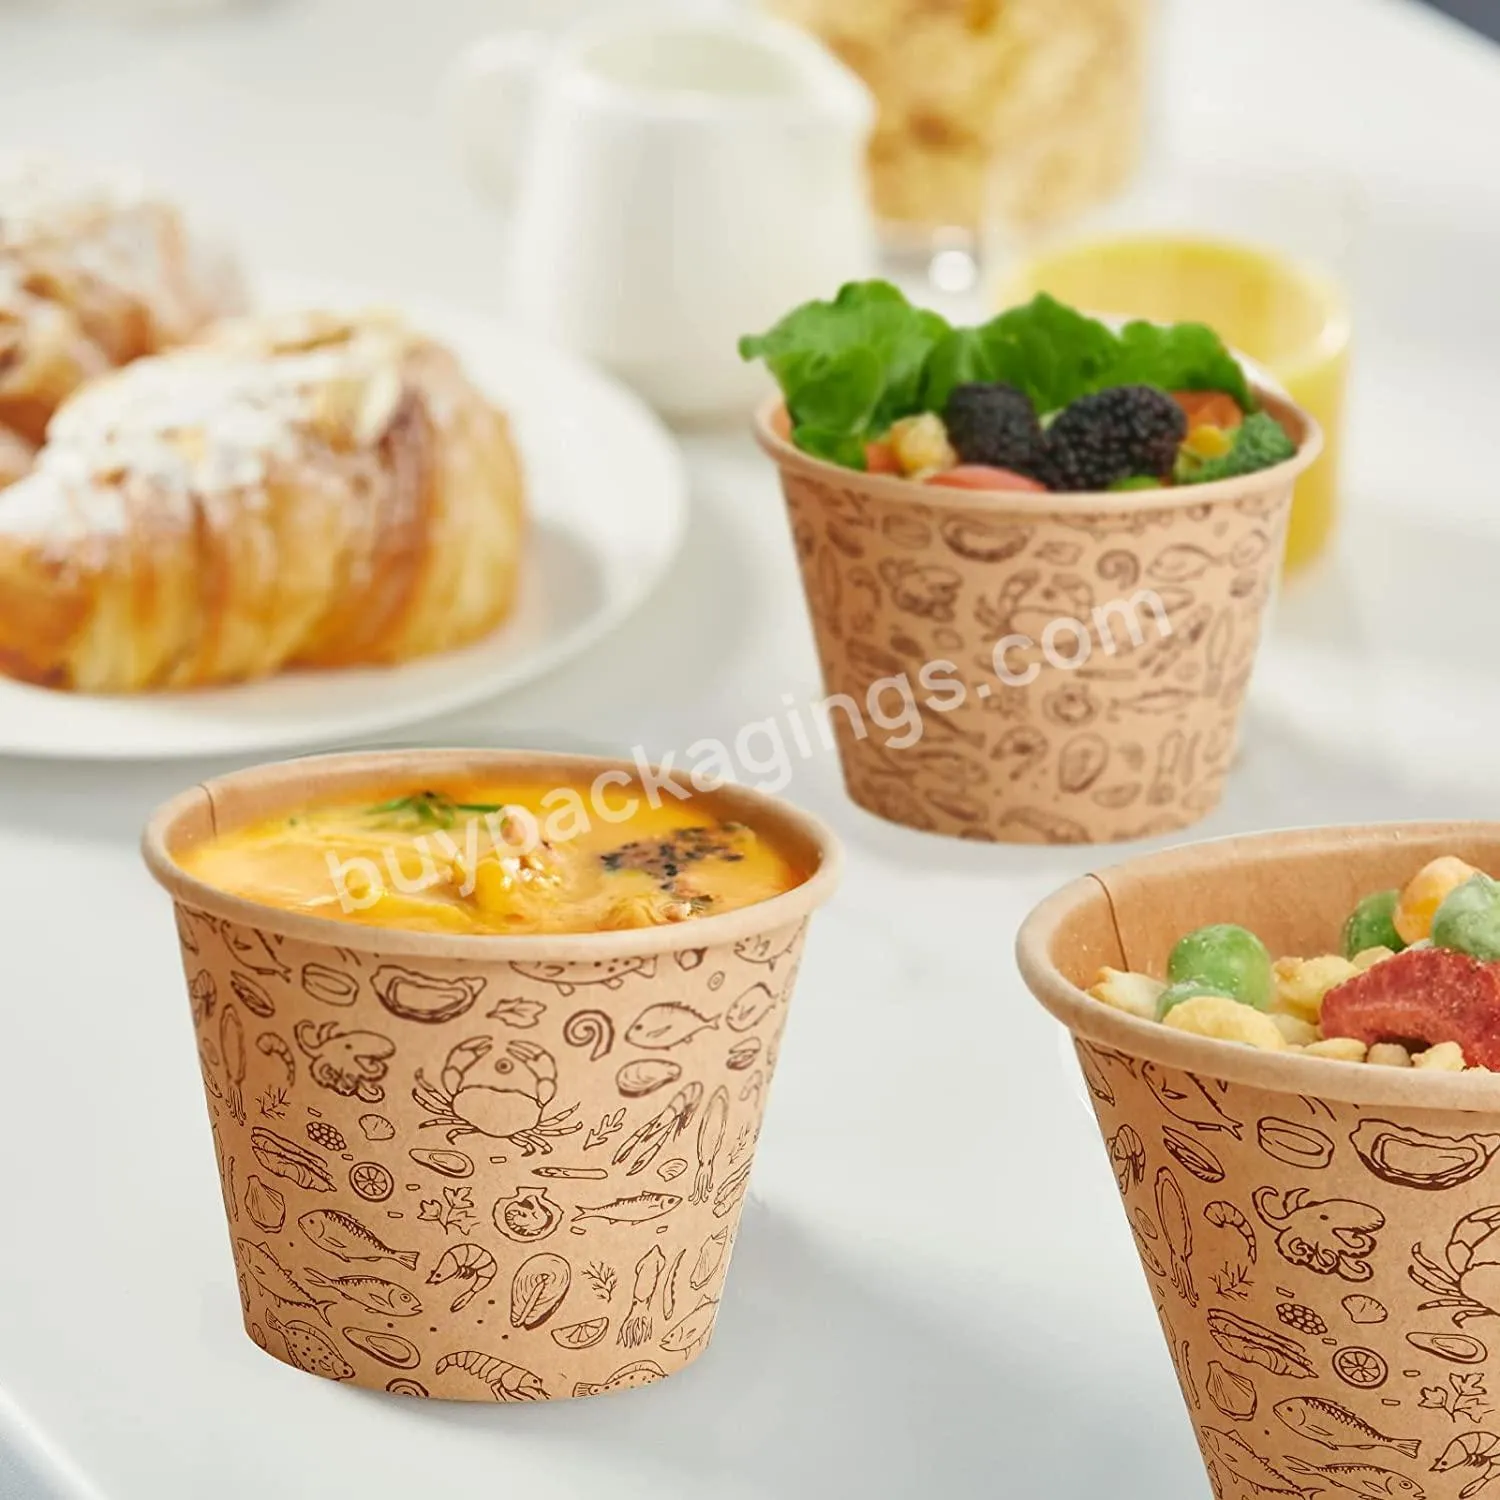 Hot Selling Disposable Kraft Food Cups Soup Cups Paper Ice Cream And Dessert Cups Yogurt Ice Cream Containers - Buy Hot Selling Disposable Kraft Food Cups Soup Cups Paper Ice Cream Cups Dessert Cups Yogurt Ice Cream Containers,Soup Cups Paper Ice Cre